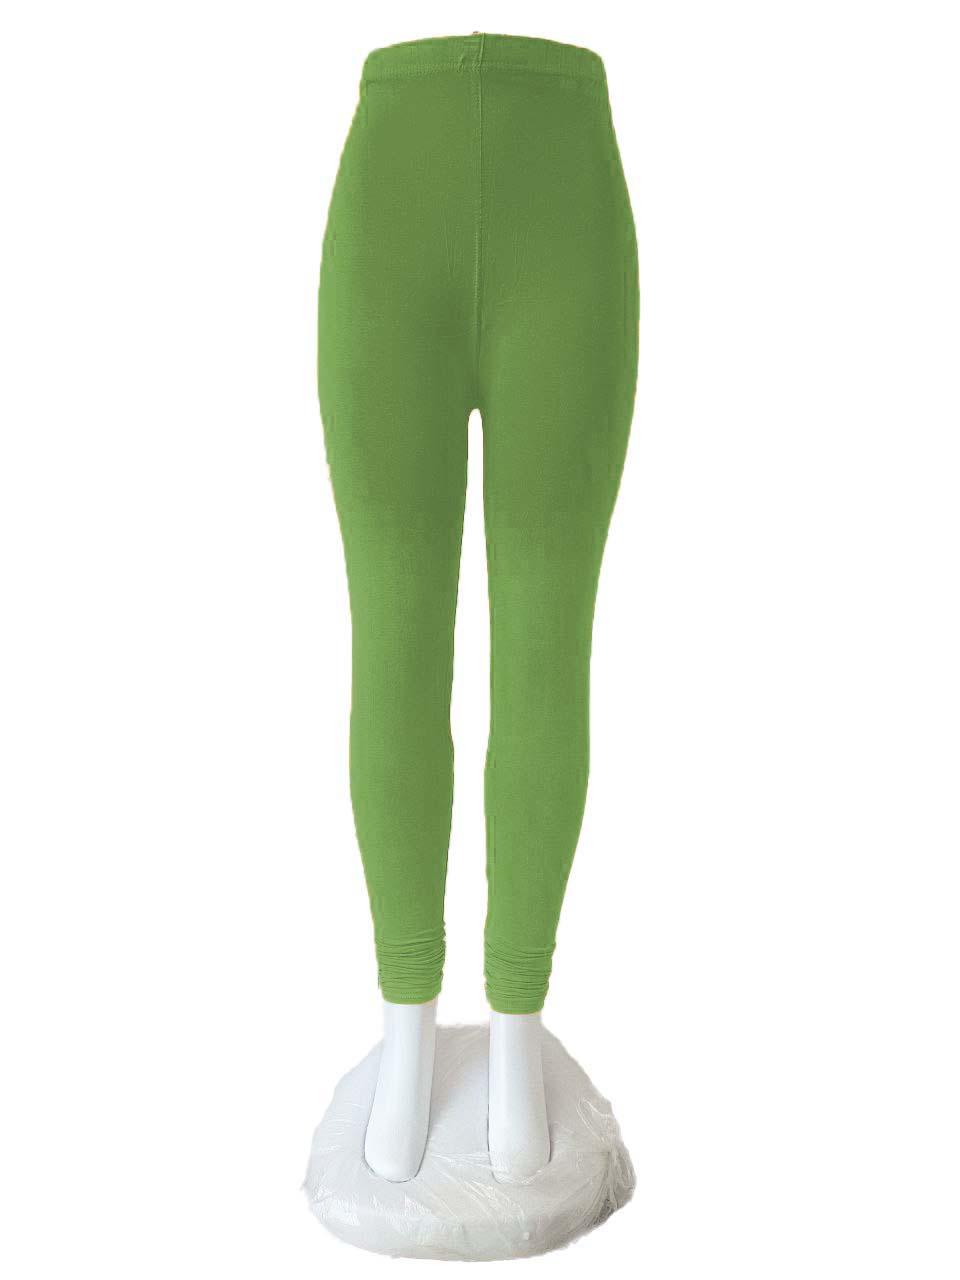 PGS Premium Cotton Pocket Myaani Chudidar Legging - Stylish and Stretchy  Lycra Light Green Leggings for Unmatched Style and Comfort